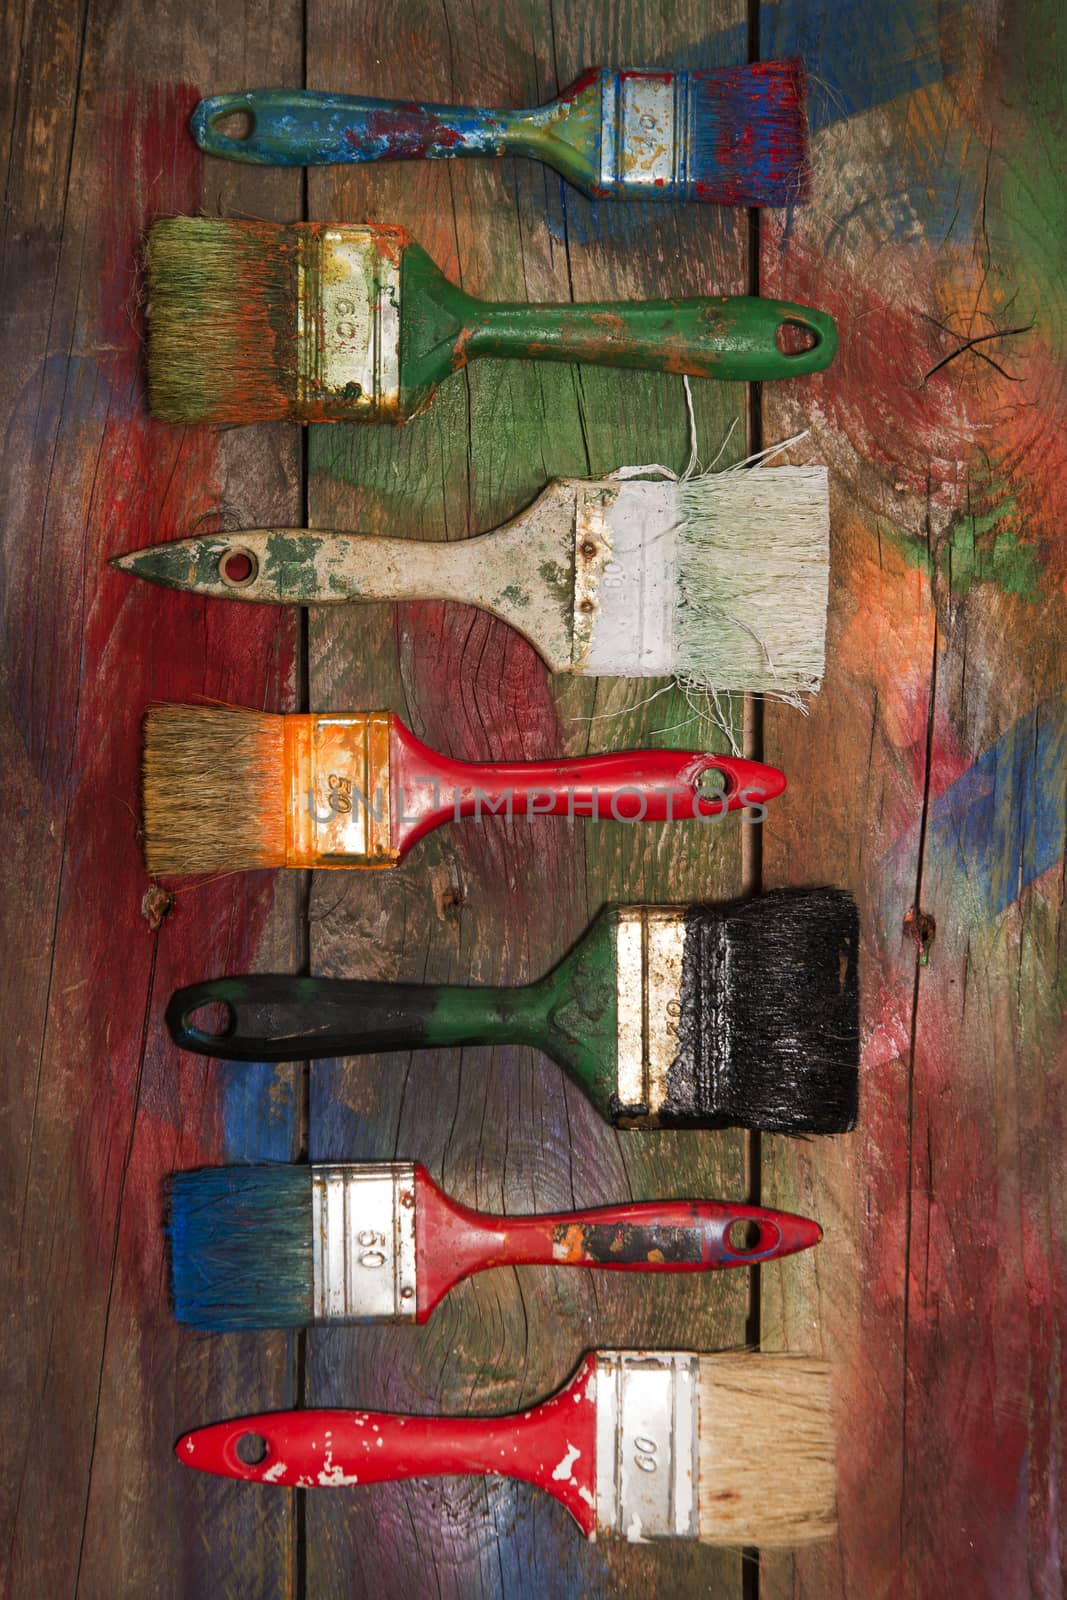 Brushes set of new and old with various colors